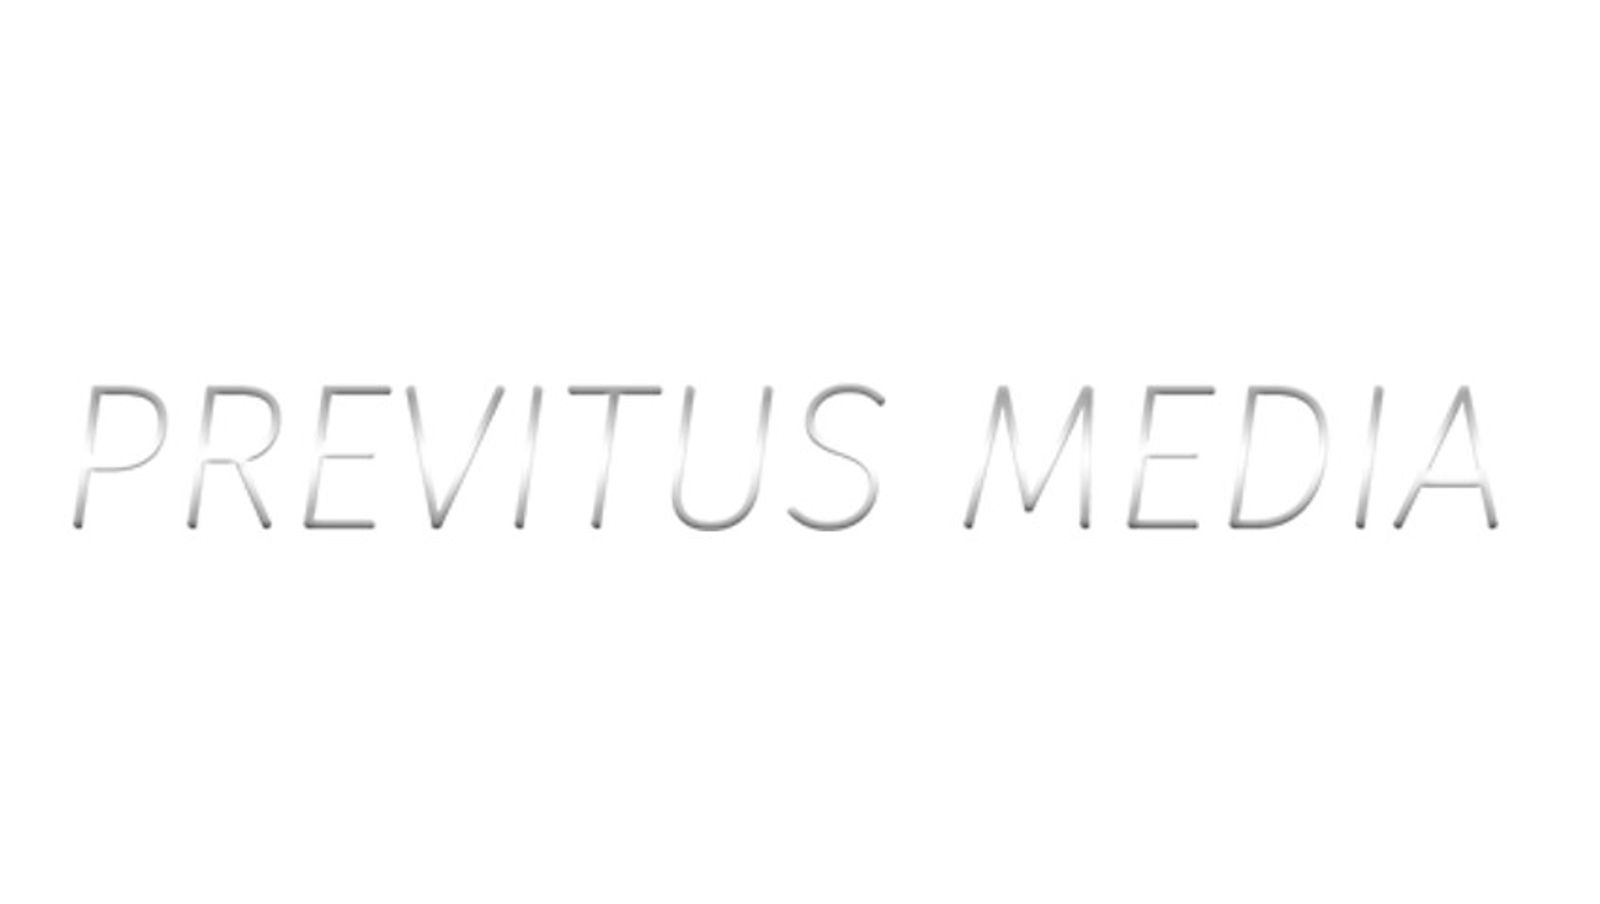 Previtus Media Launches With Two Original Series